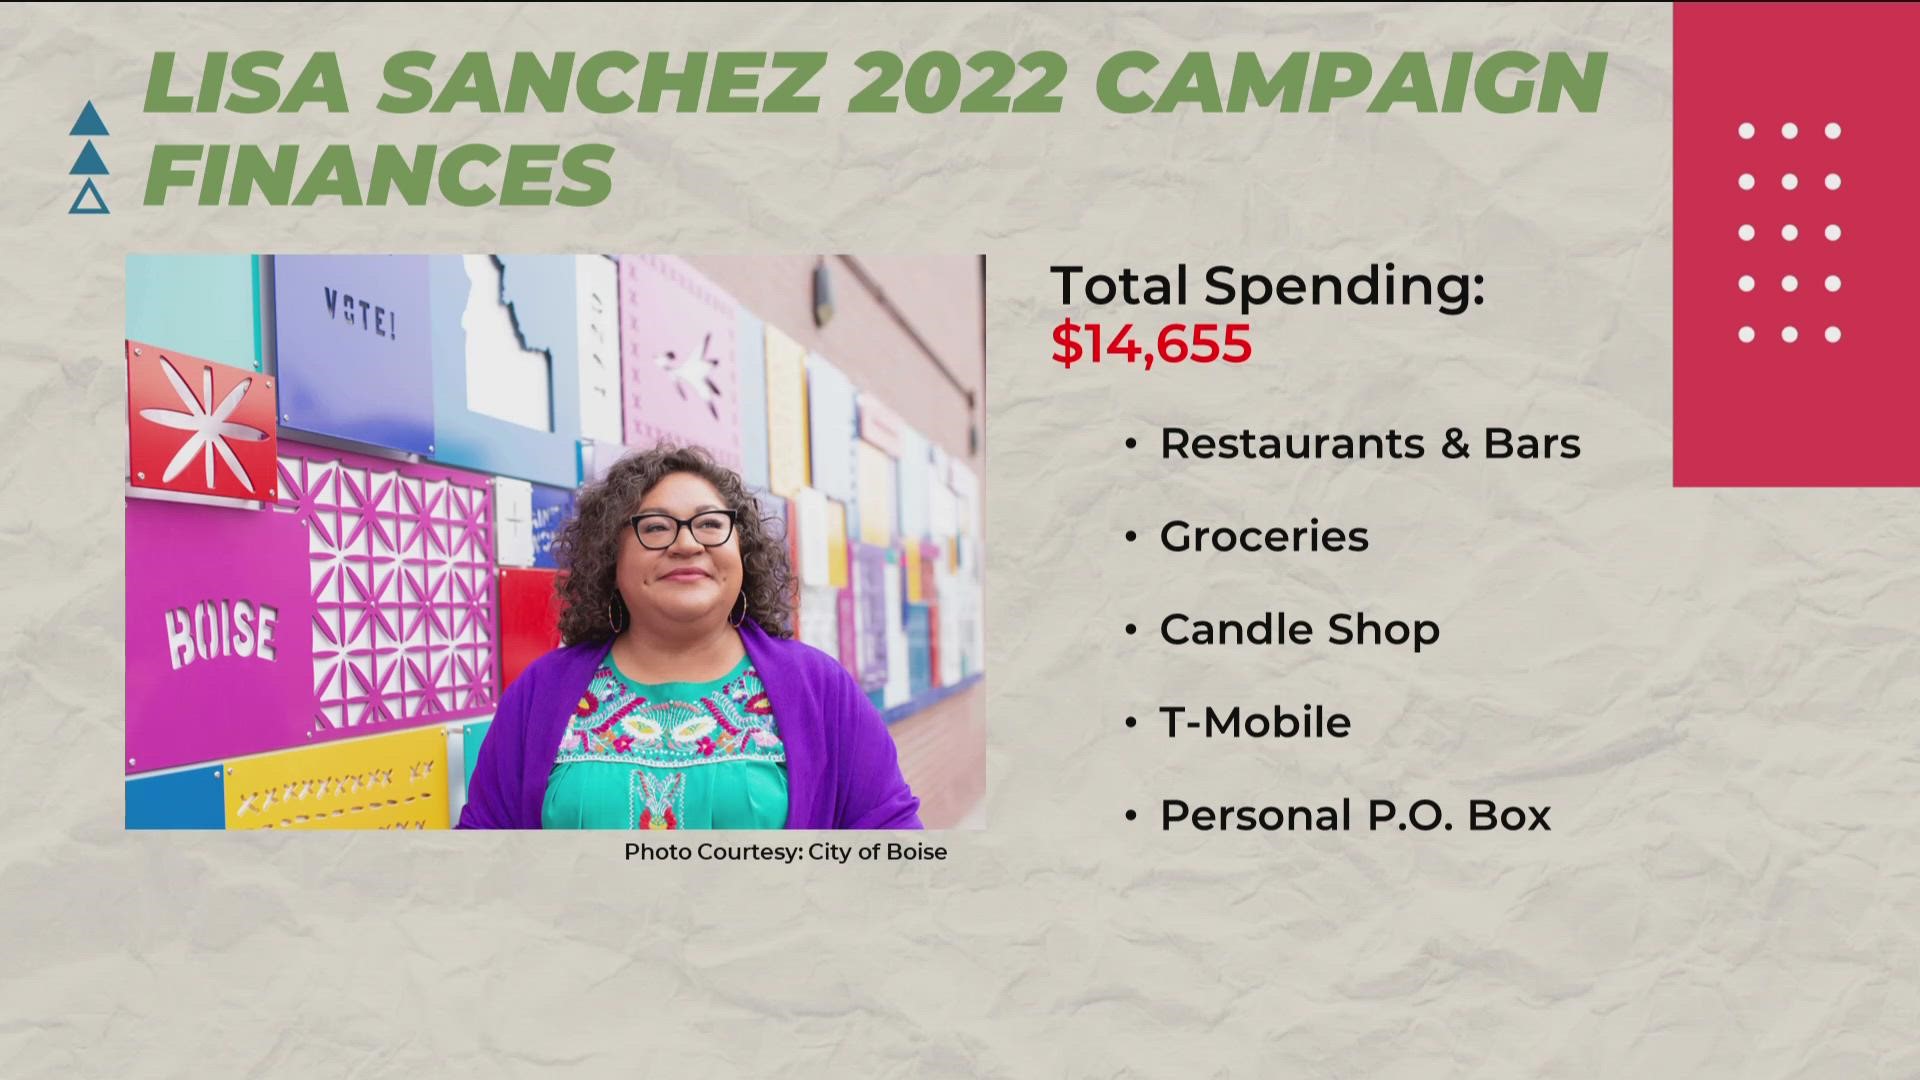 Sánchez spent $14,655 in 2022, which wasn't an election year. An expenditure report by Ada County Elections Office has now absolved Sánchez of any wrongdoing.